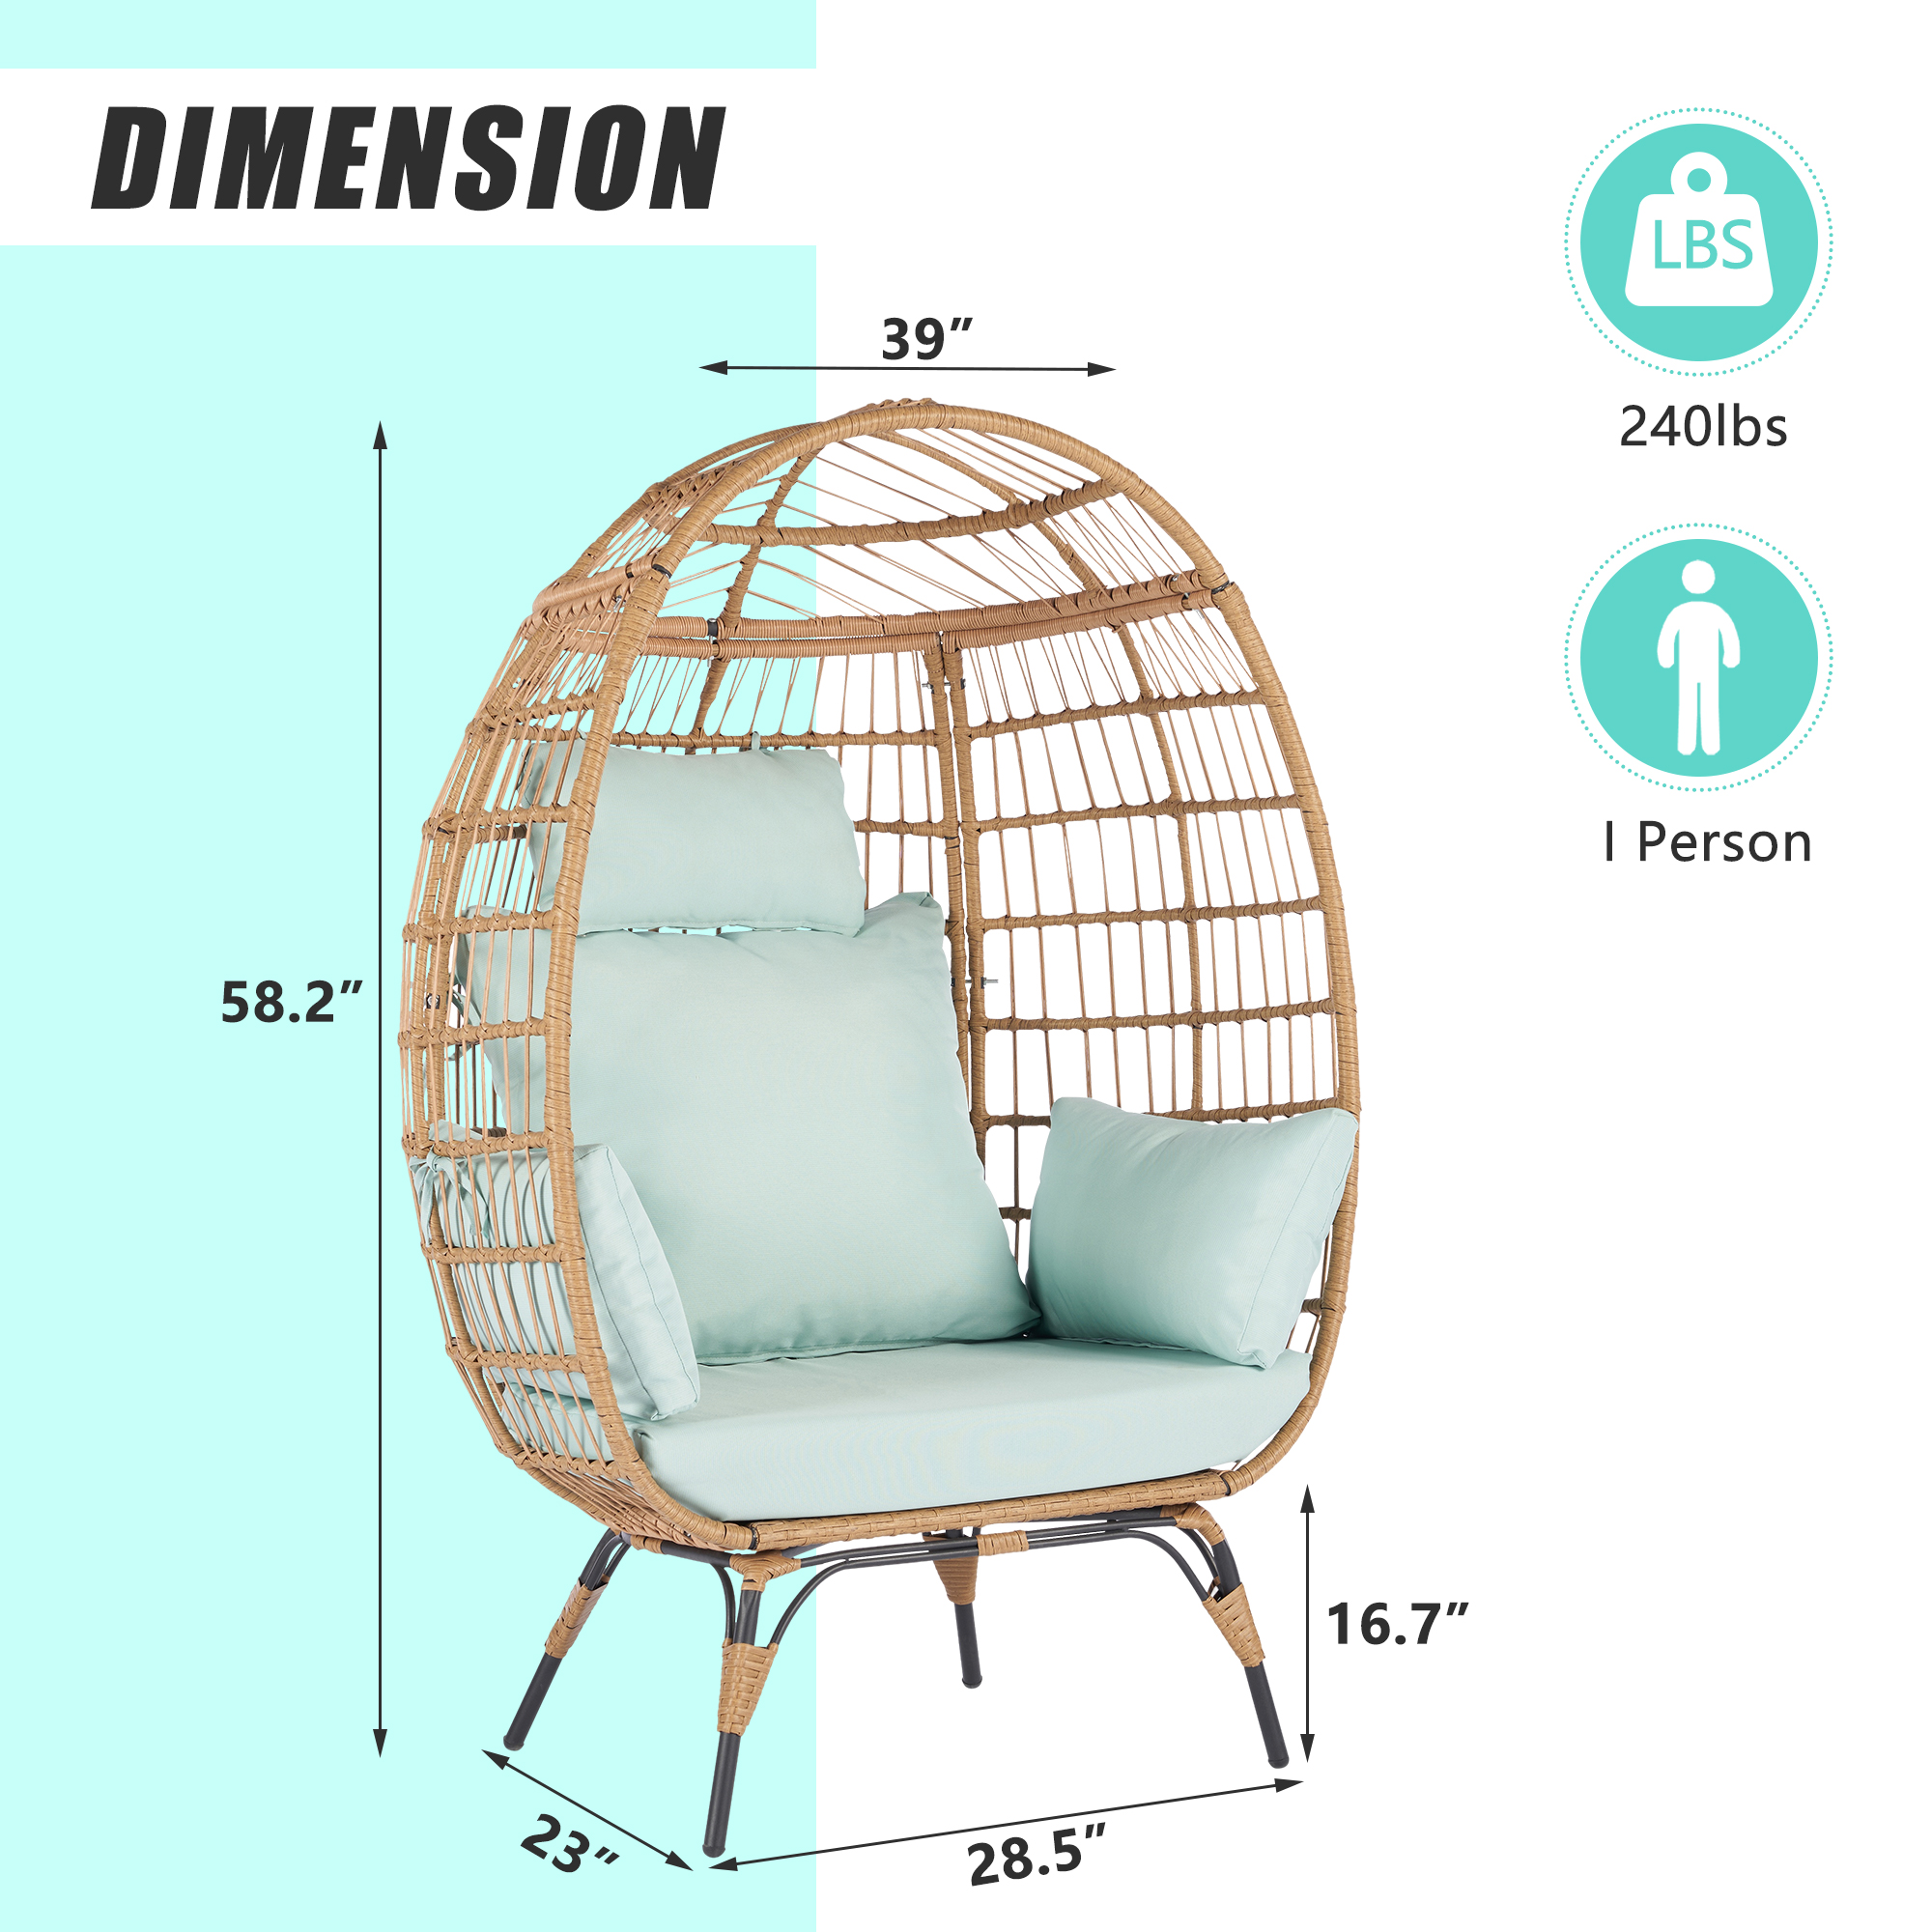 Outdoor Stationary Egg Chair, Wicker Egg Swing Chair with Blue Cushions for Patio, Garden, Backyard, Rattan Standing Egg Chair - image 3 of 10